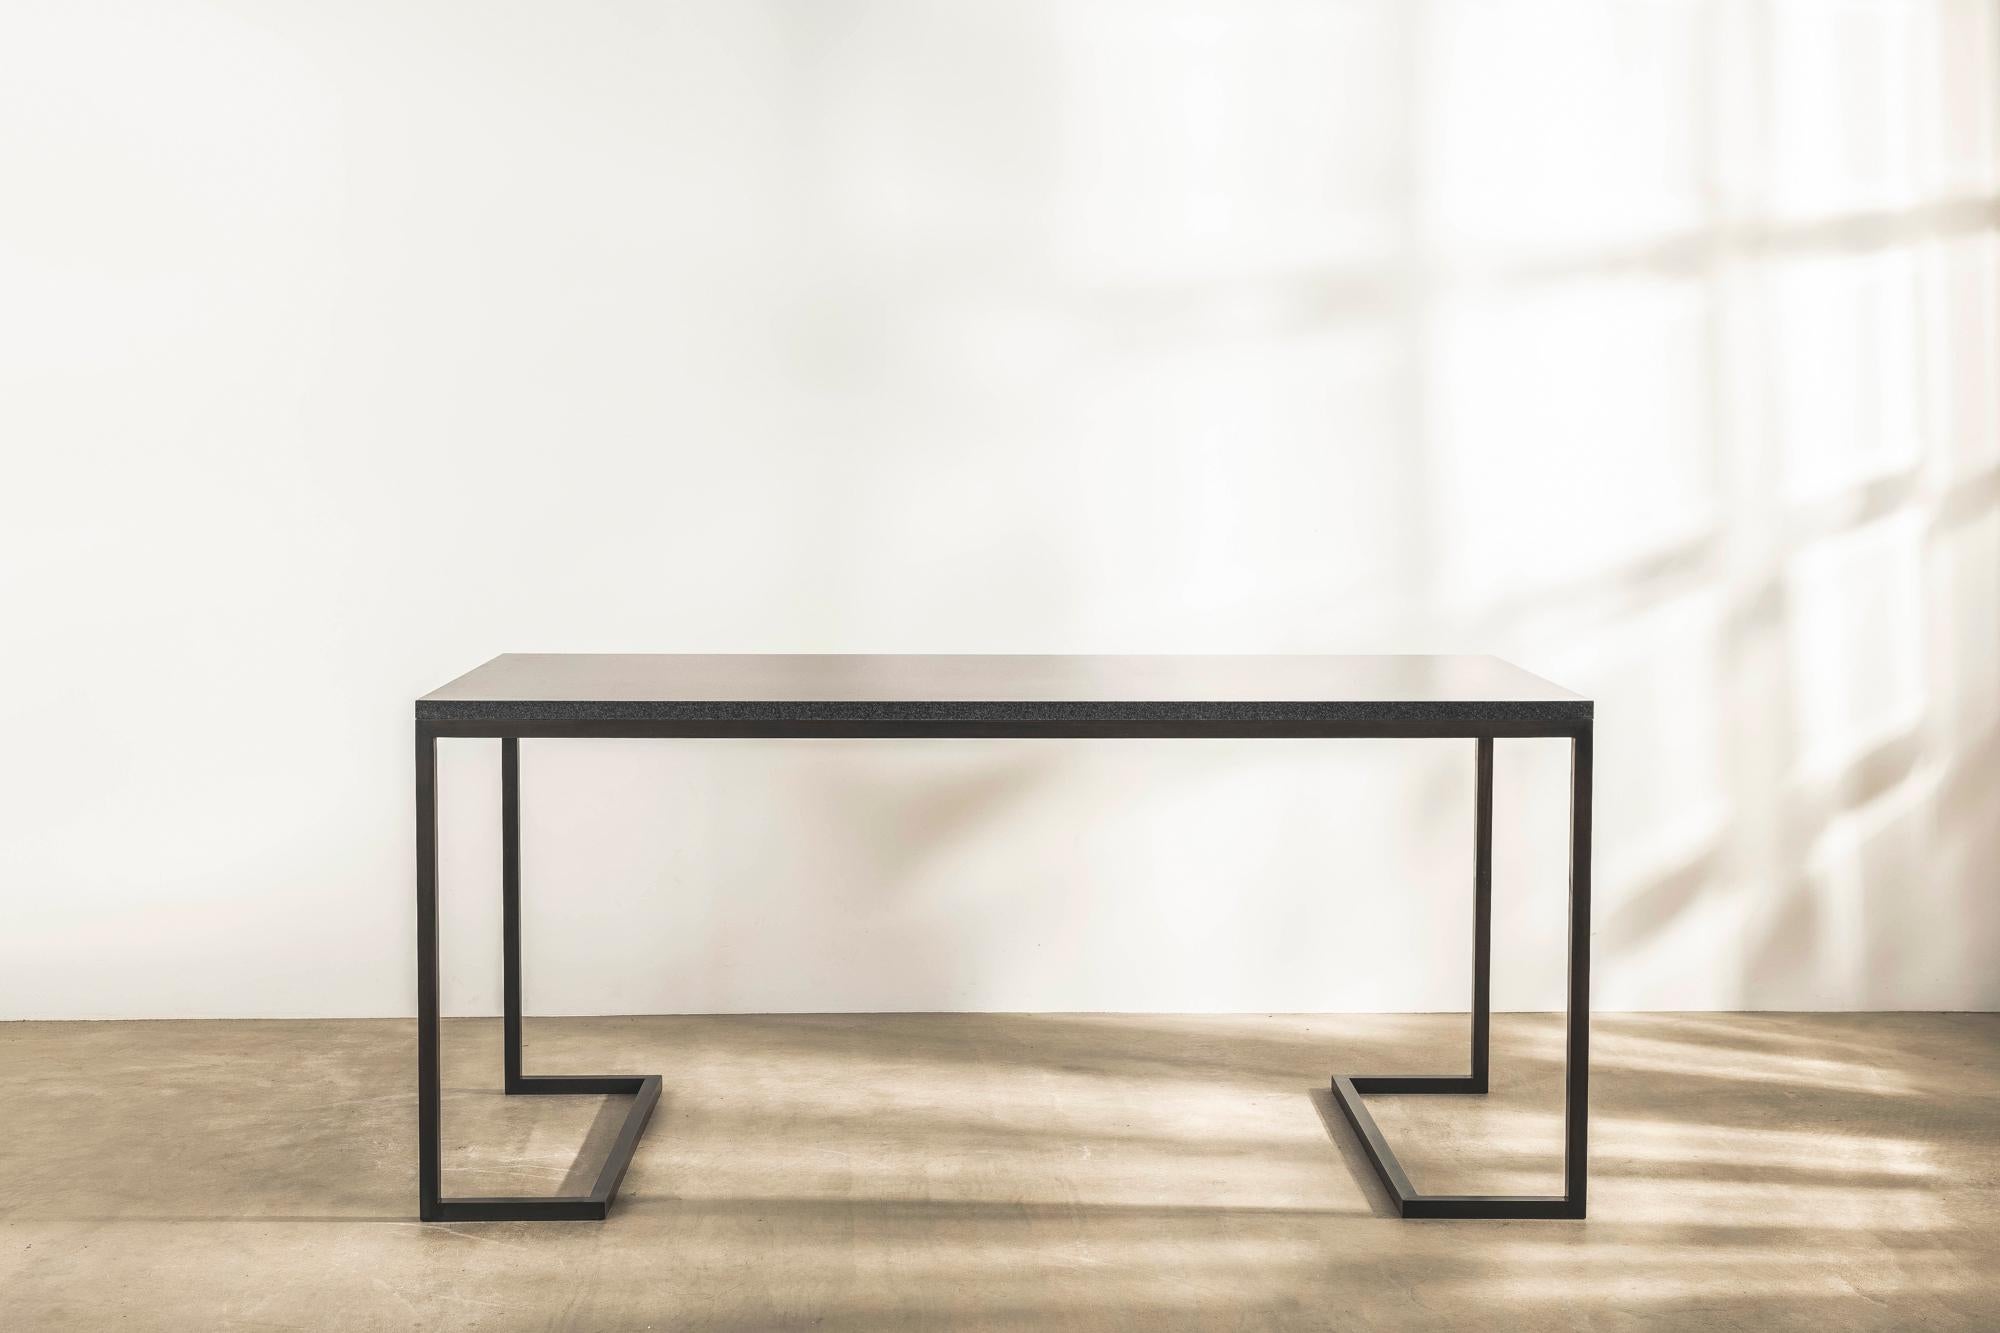 With a focus on clarity of line, form and function, this special edition desk with Indian honed granite top and angular patinated brass frame, is almost 2 metres long and stands an imposing 85cm high.

Designed by revered British architectural